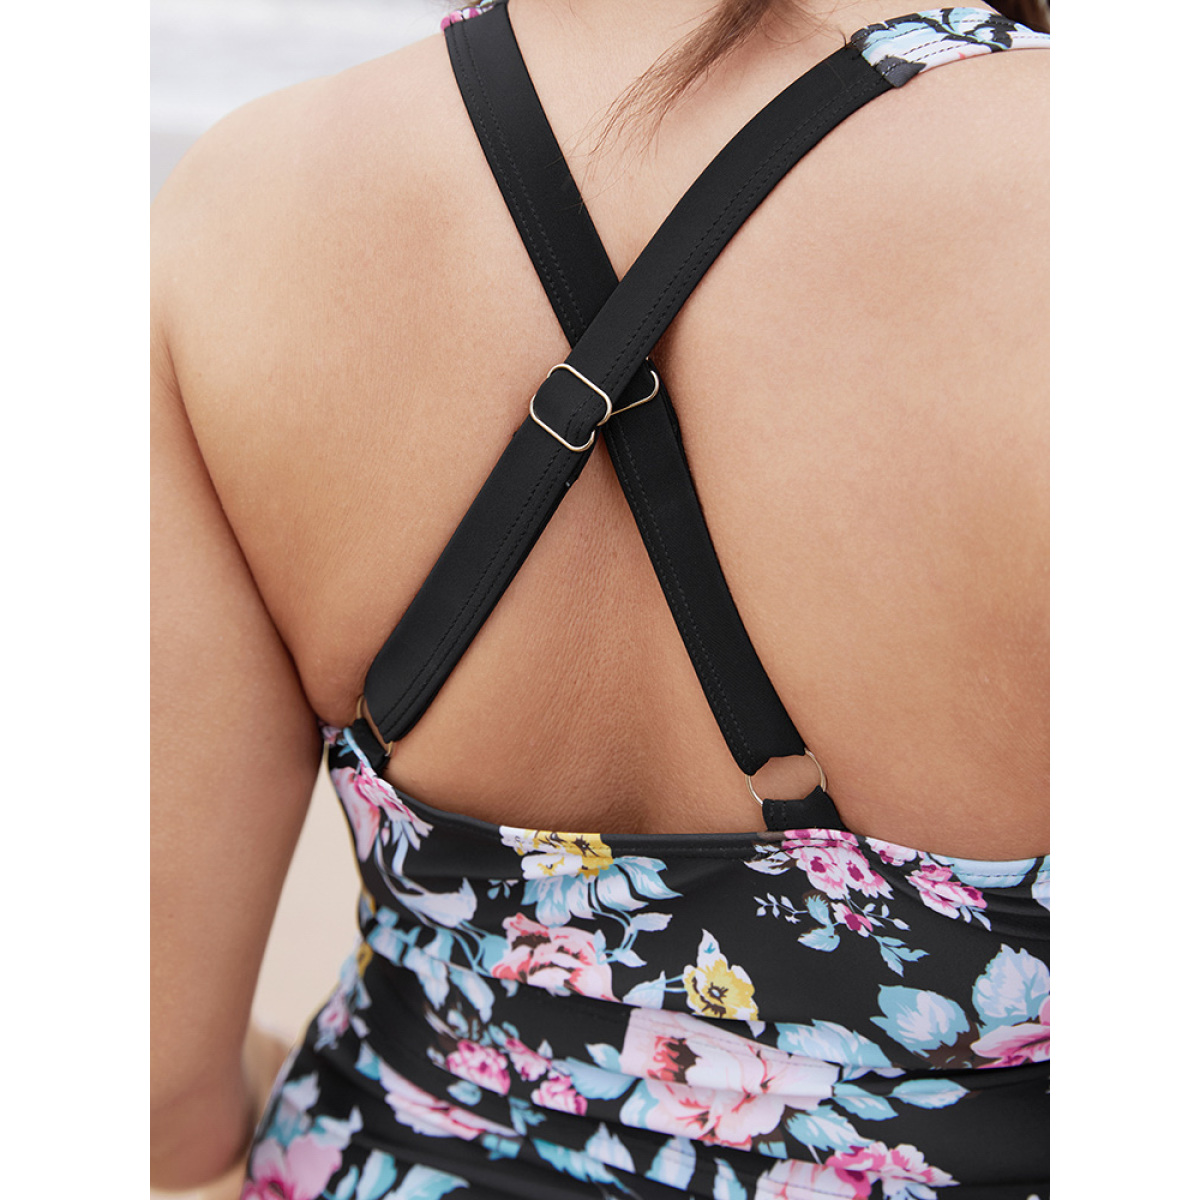 

Plus Size Floral Ruched Knotted Crossover Back Tankini Top Women's Swimwear BlackFlower Vacation Adjustable Straps High stretch Skinny Curve Swim Tops BloomChic